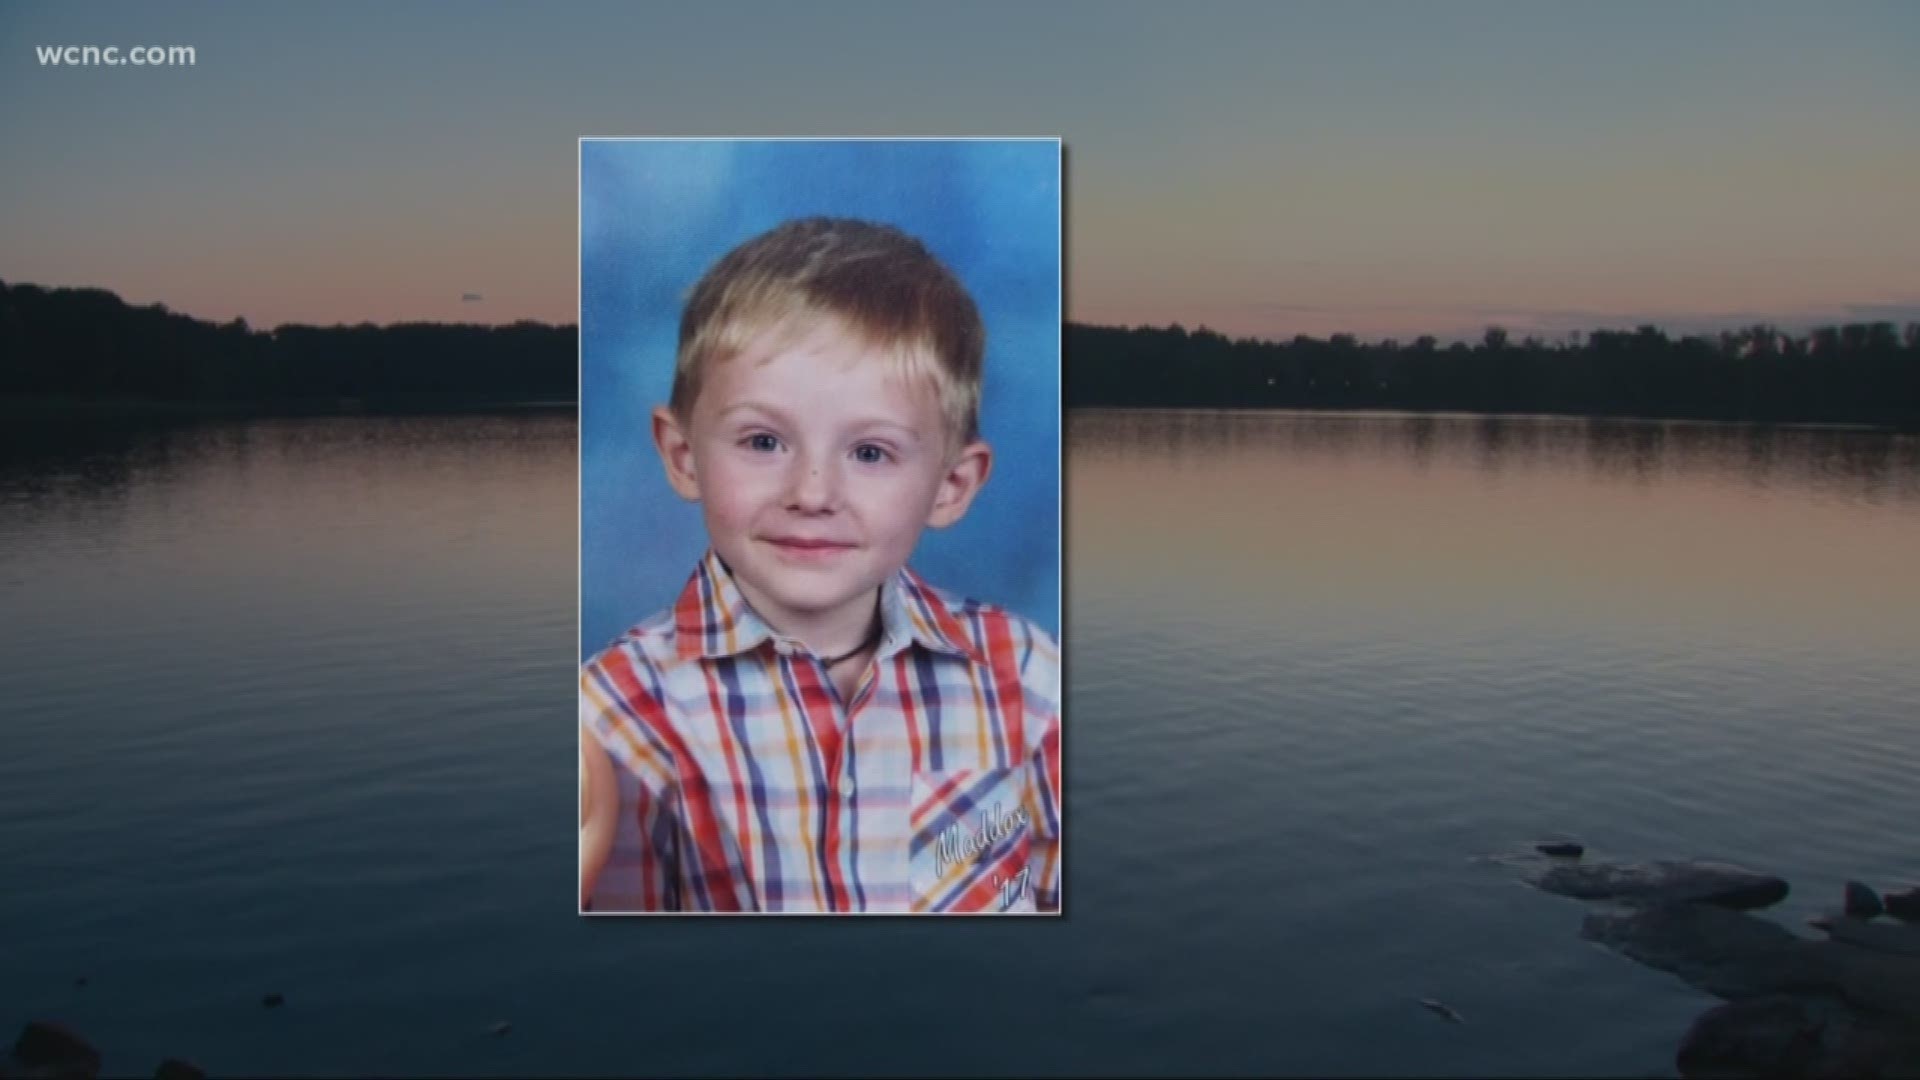 The search is continuing in Gastonia after a six-year-old non-verbal autistic boy went missing.